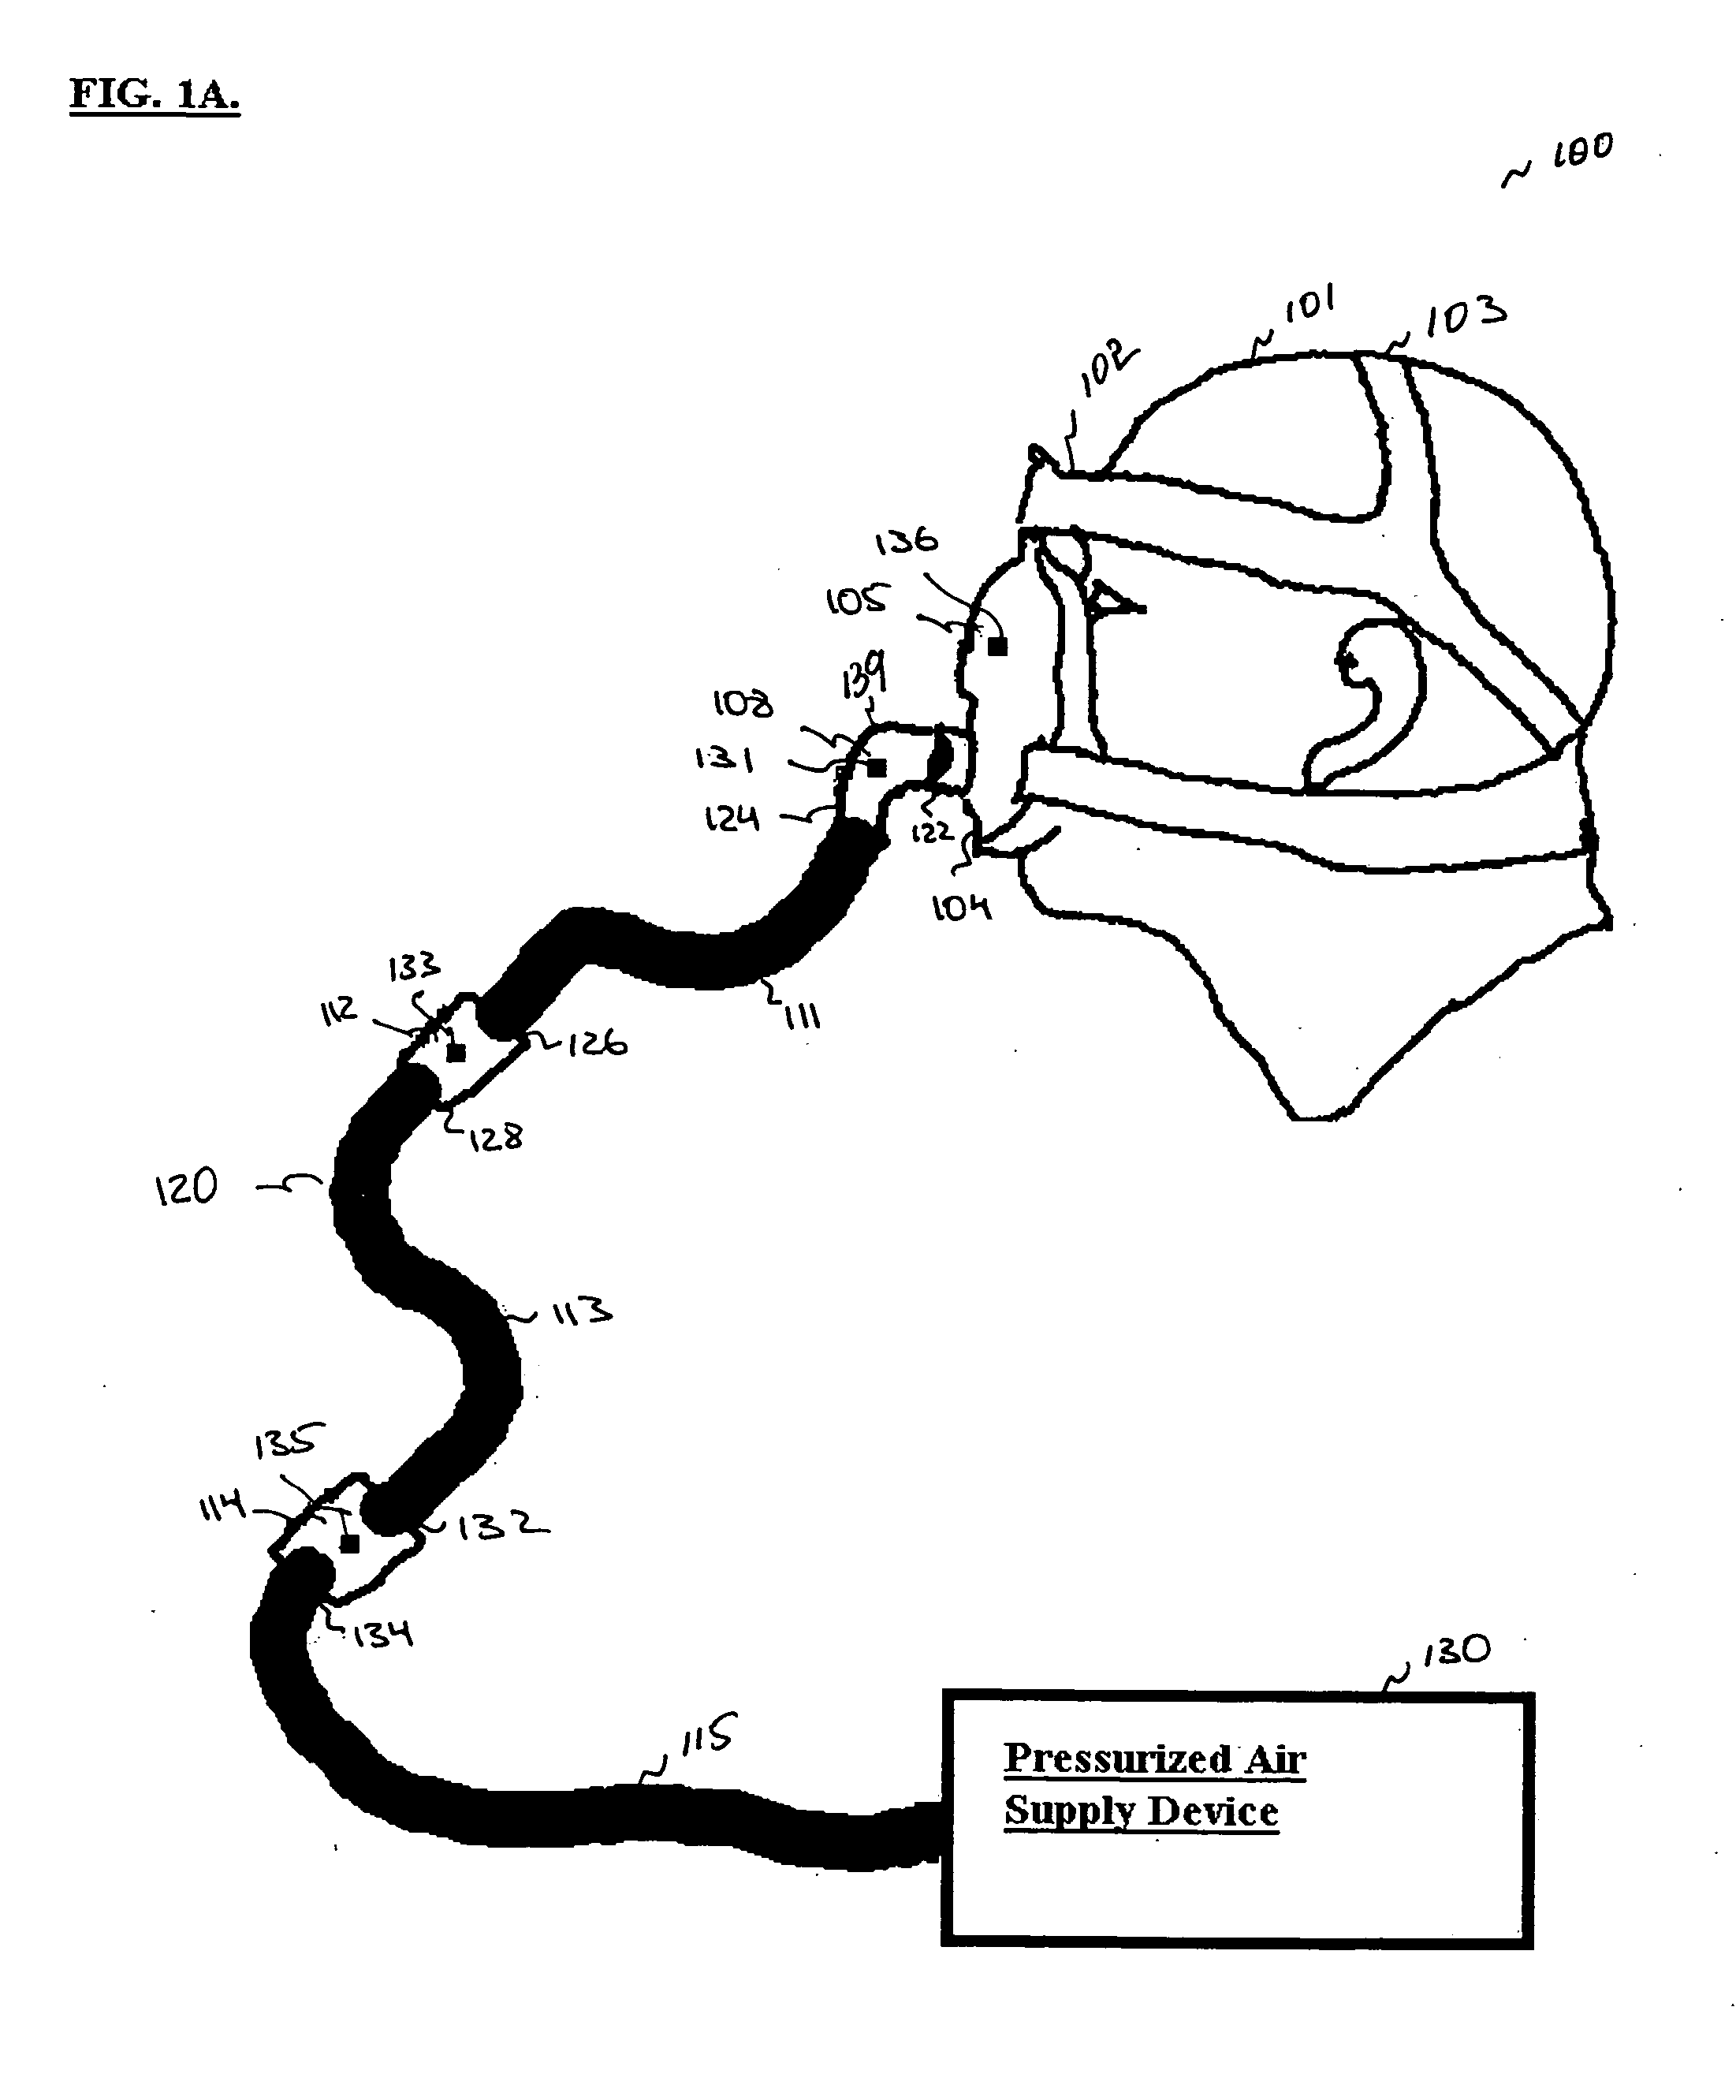 Method and system for controlling breathing